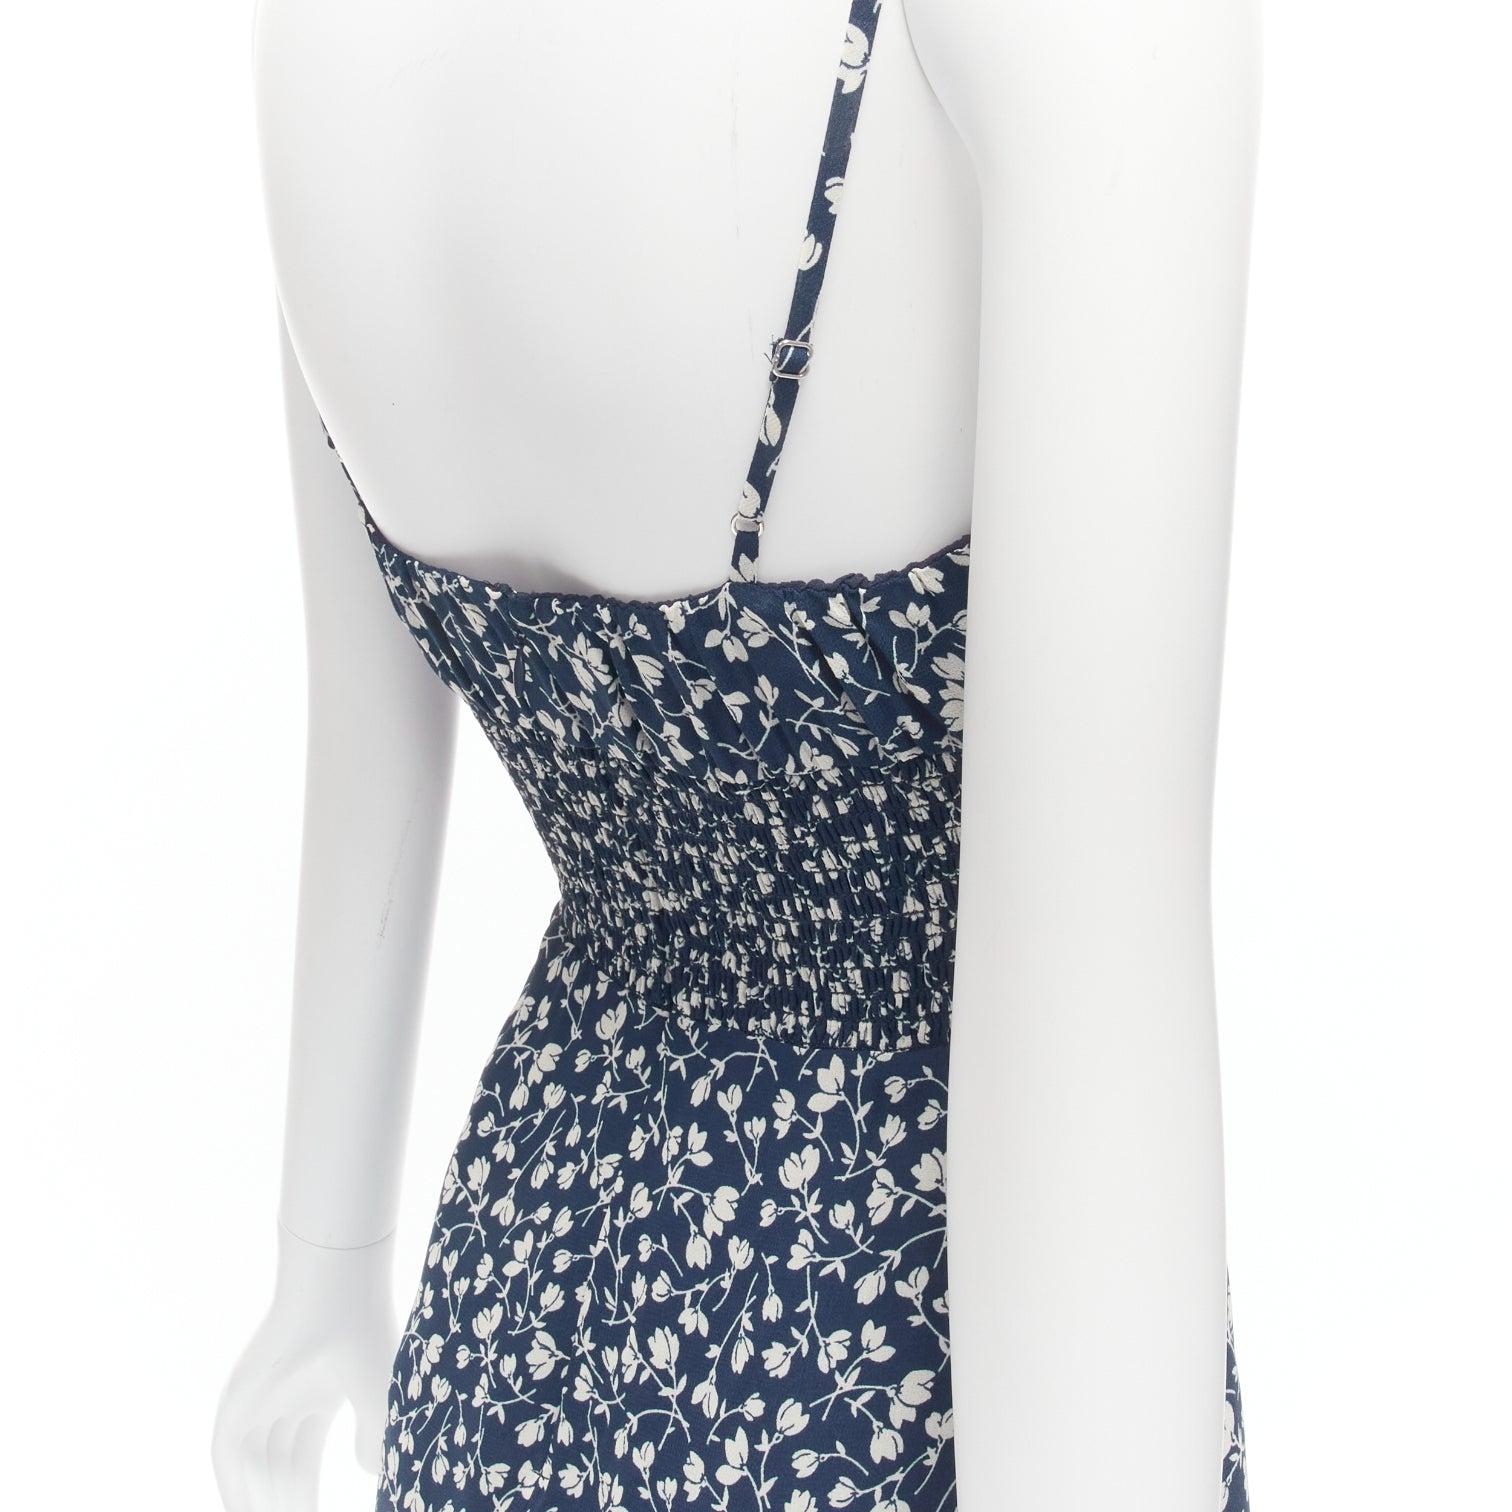 REFORMATION Elyse white navy floral print smocked bodice mini dress US2 S
Reference: SNKO/A00401
Brand: Reformation
Model: Elyse
Material: Viscose, Blend
Color: Navy, White
Pattern: Floral
Closure: Zip
Made in: United States

CONDITION:
Condition: